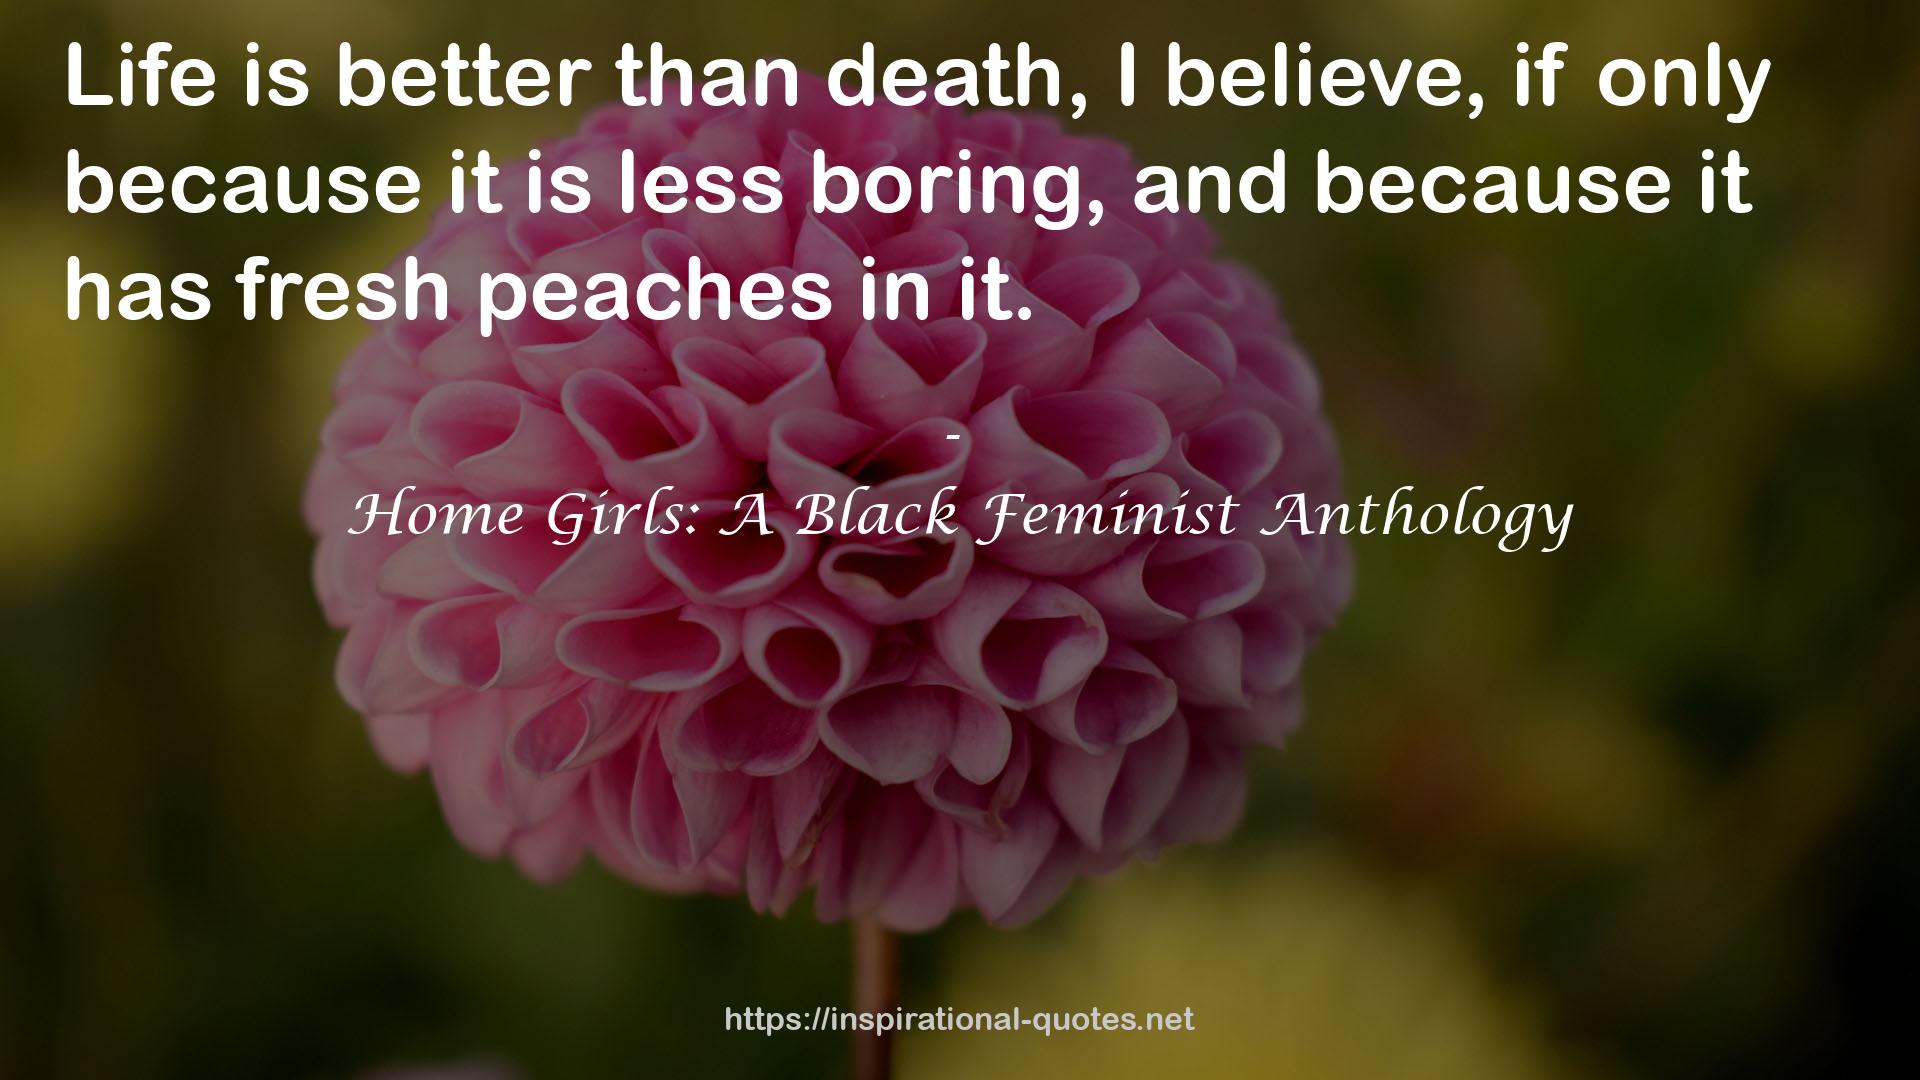 Home Girls: A Black Feminist Anthology QUOTES